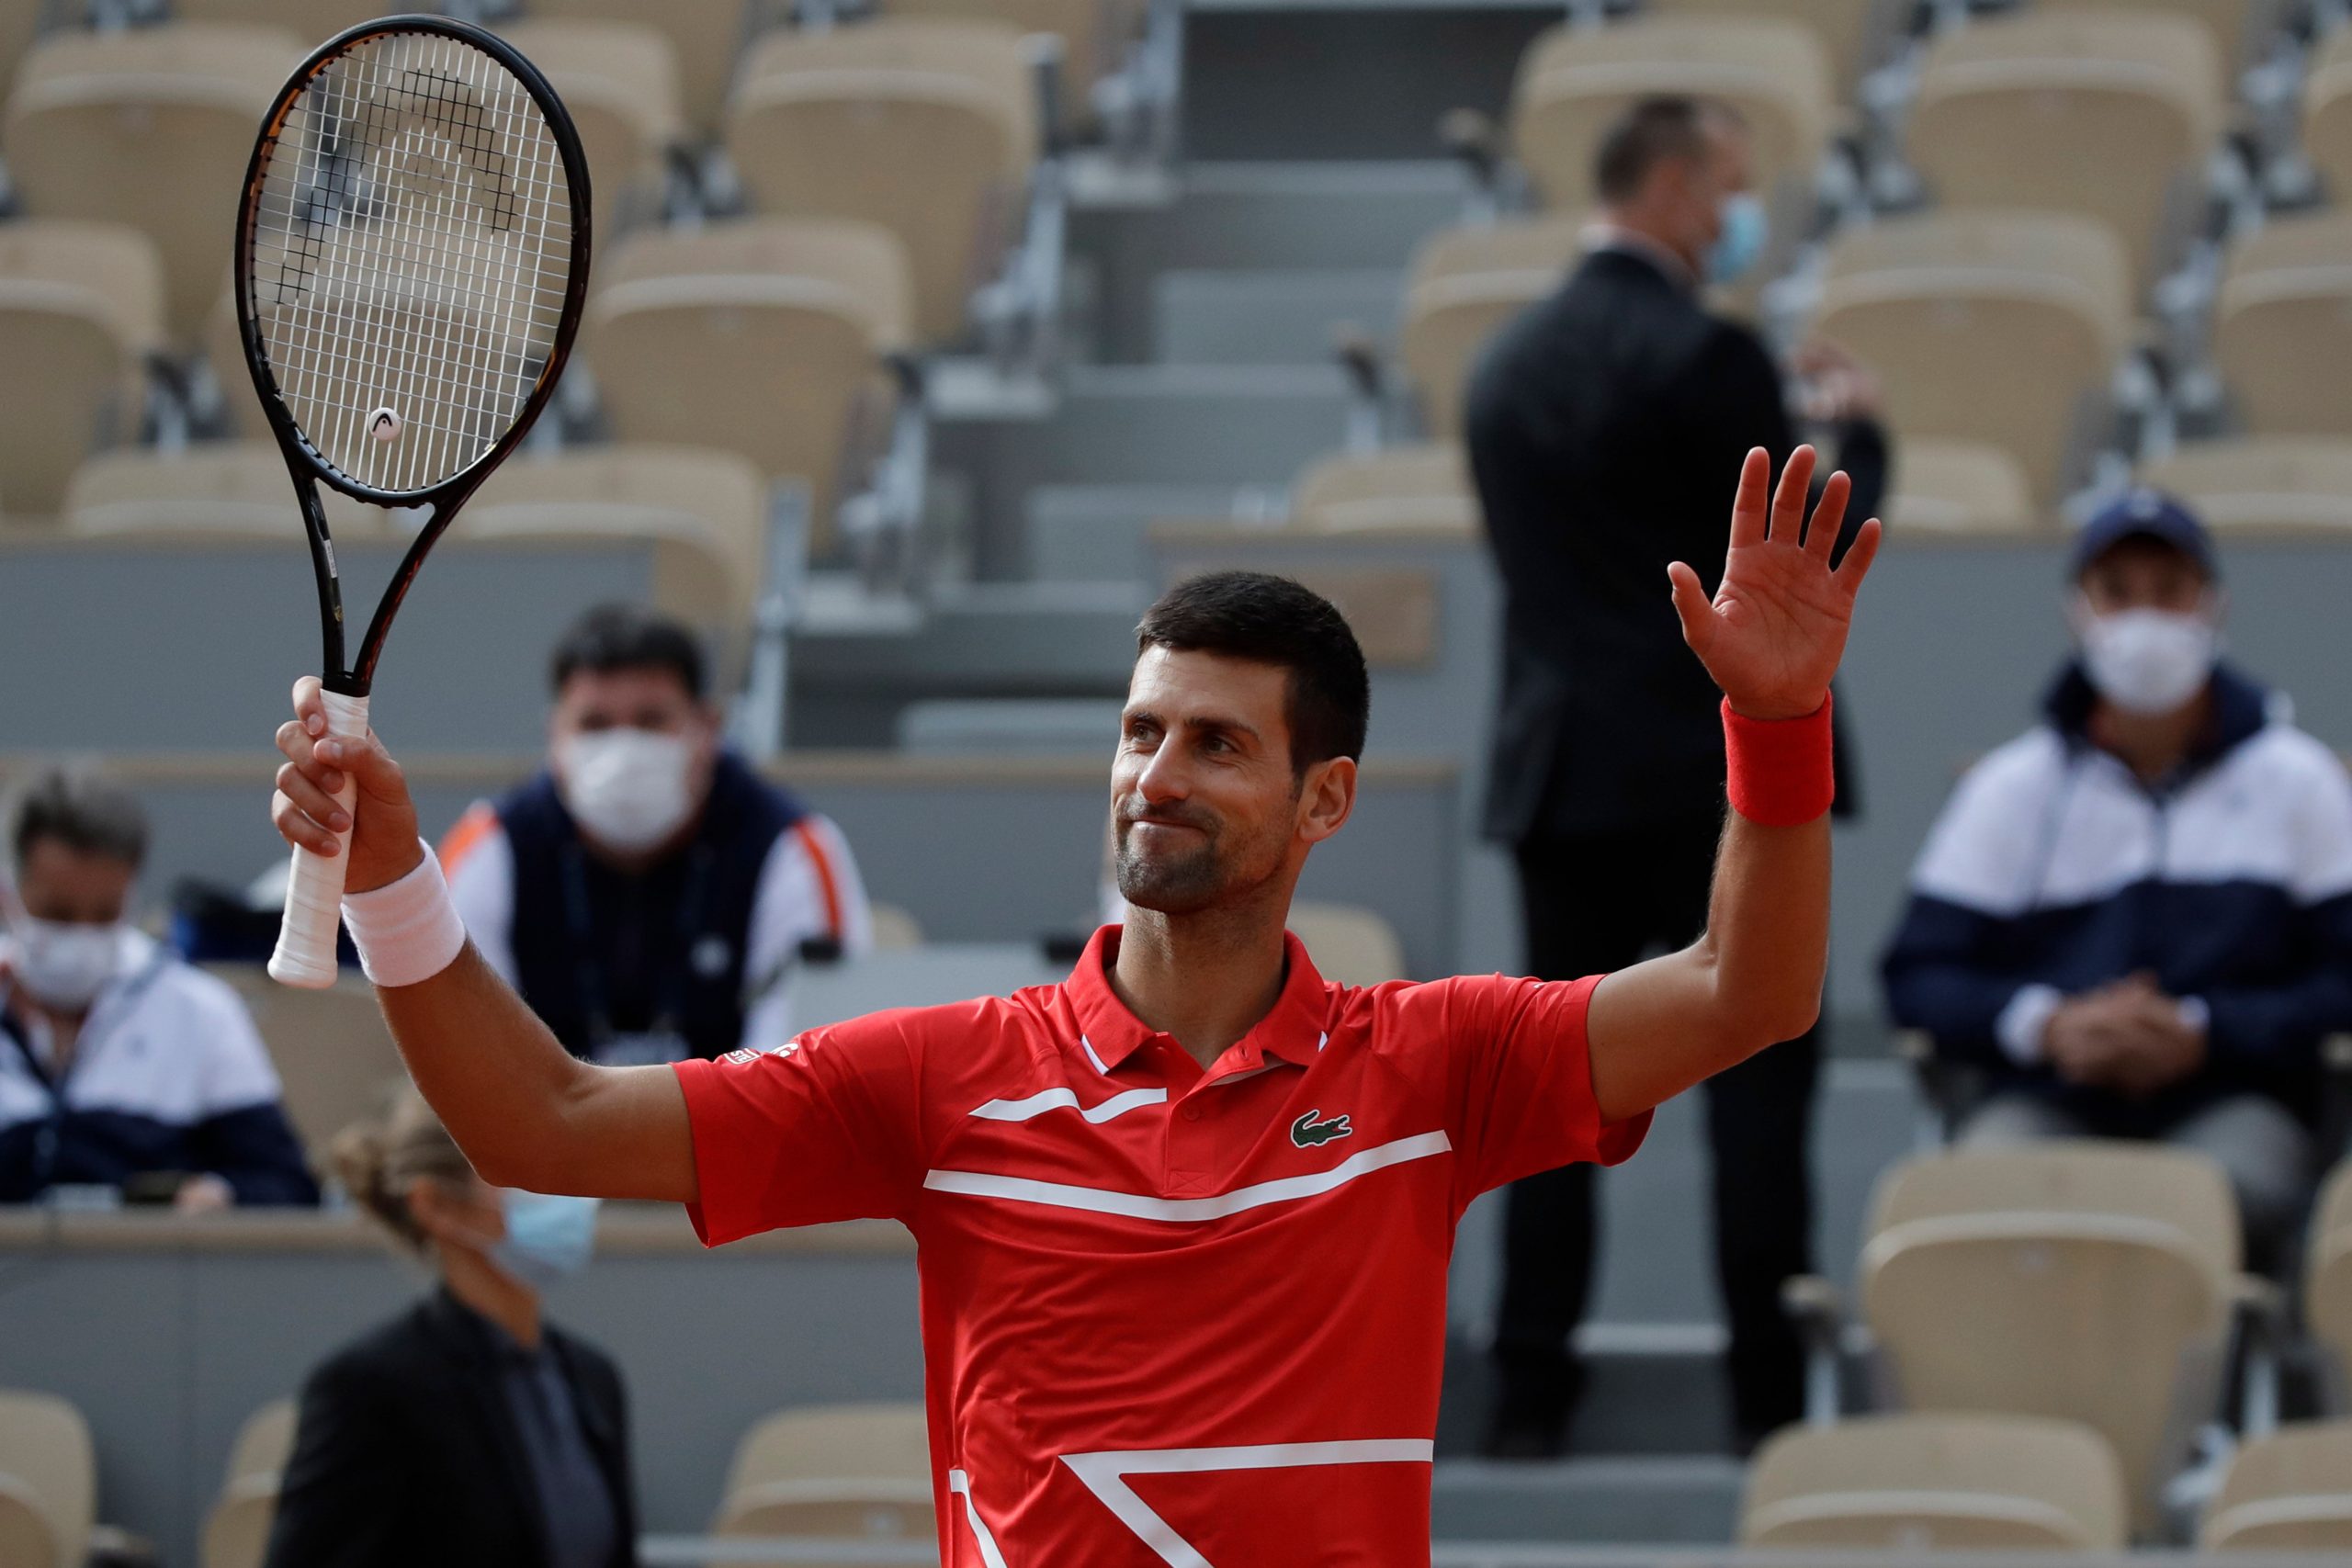 French Open: Novak Djokovic equals Roger Federer record, cruises into third round